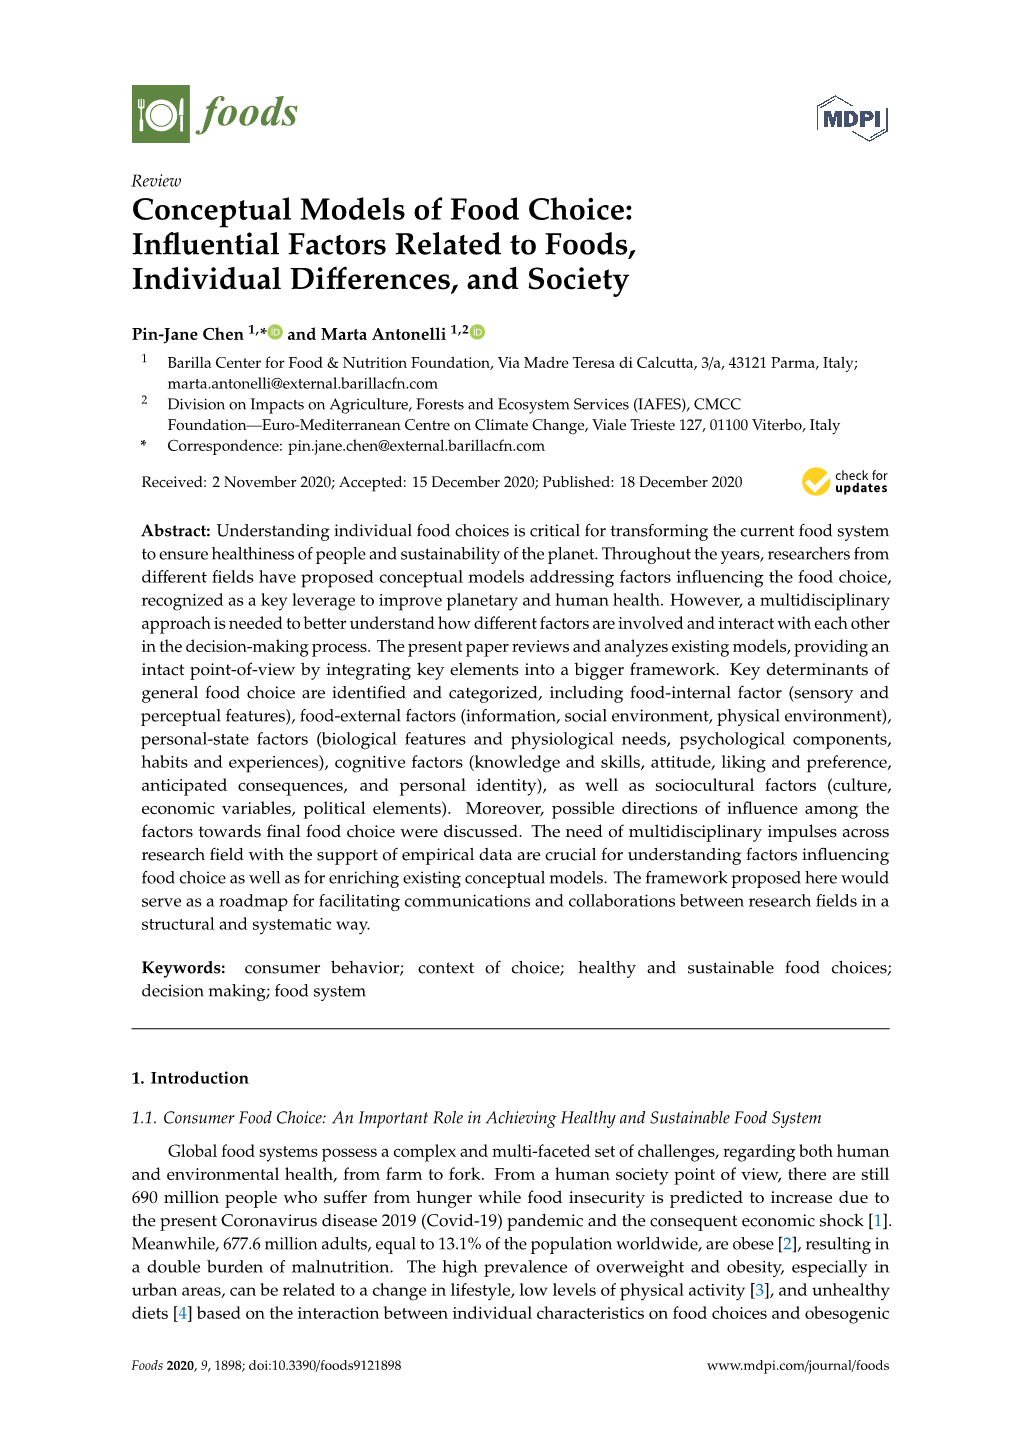 Conceptual Models of Food Choice: Influential Factors Related To